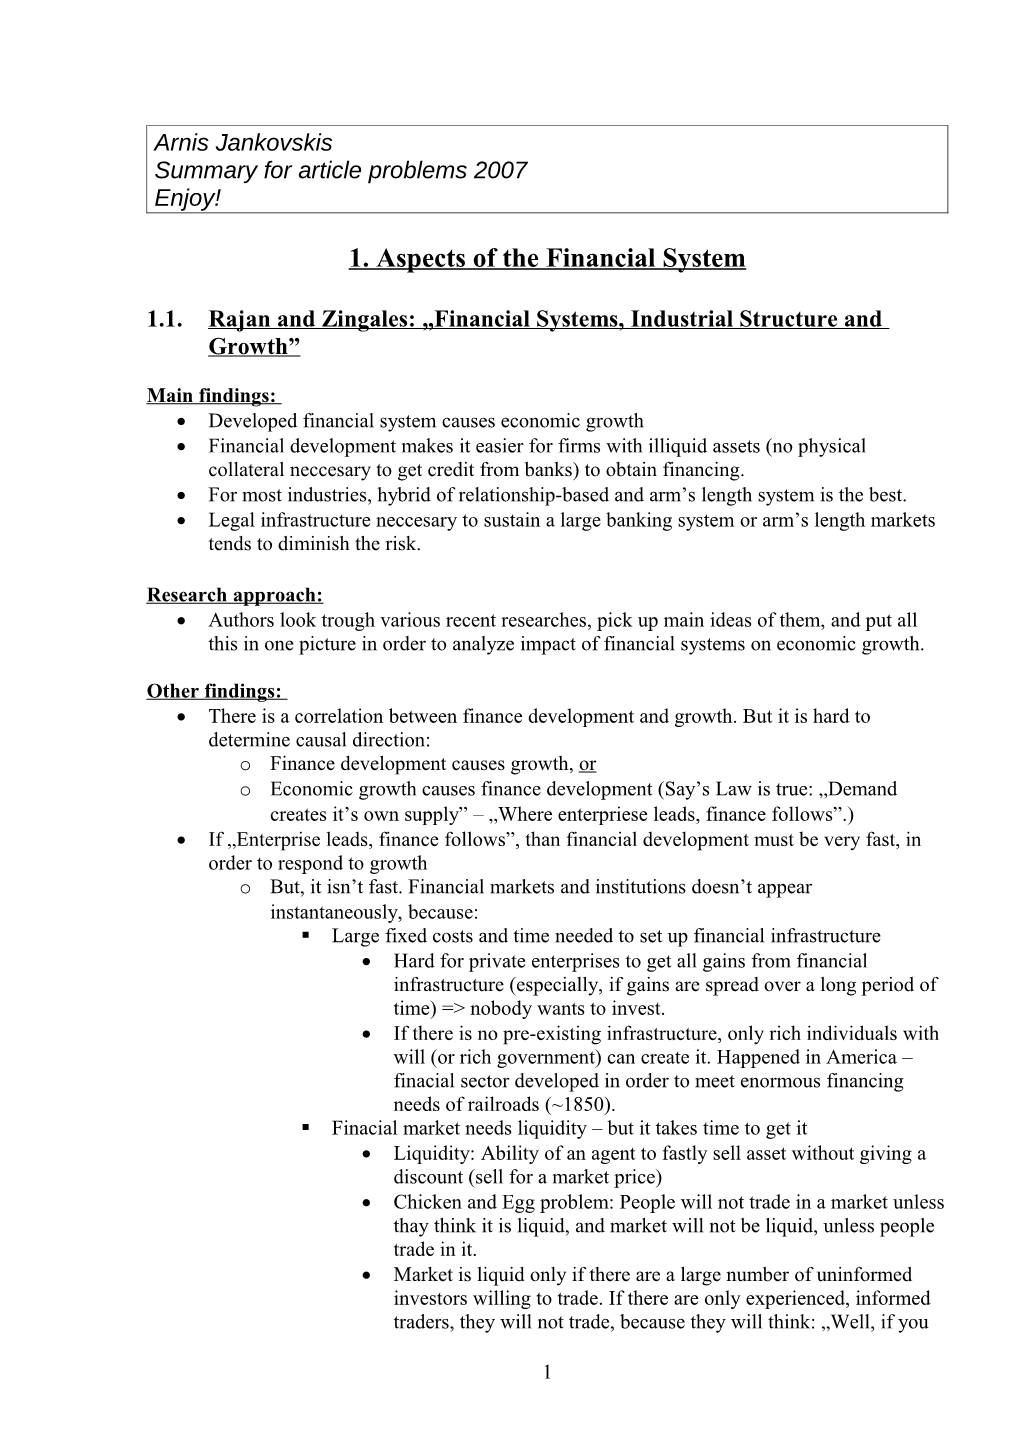 1. Aspects of the Financial System